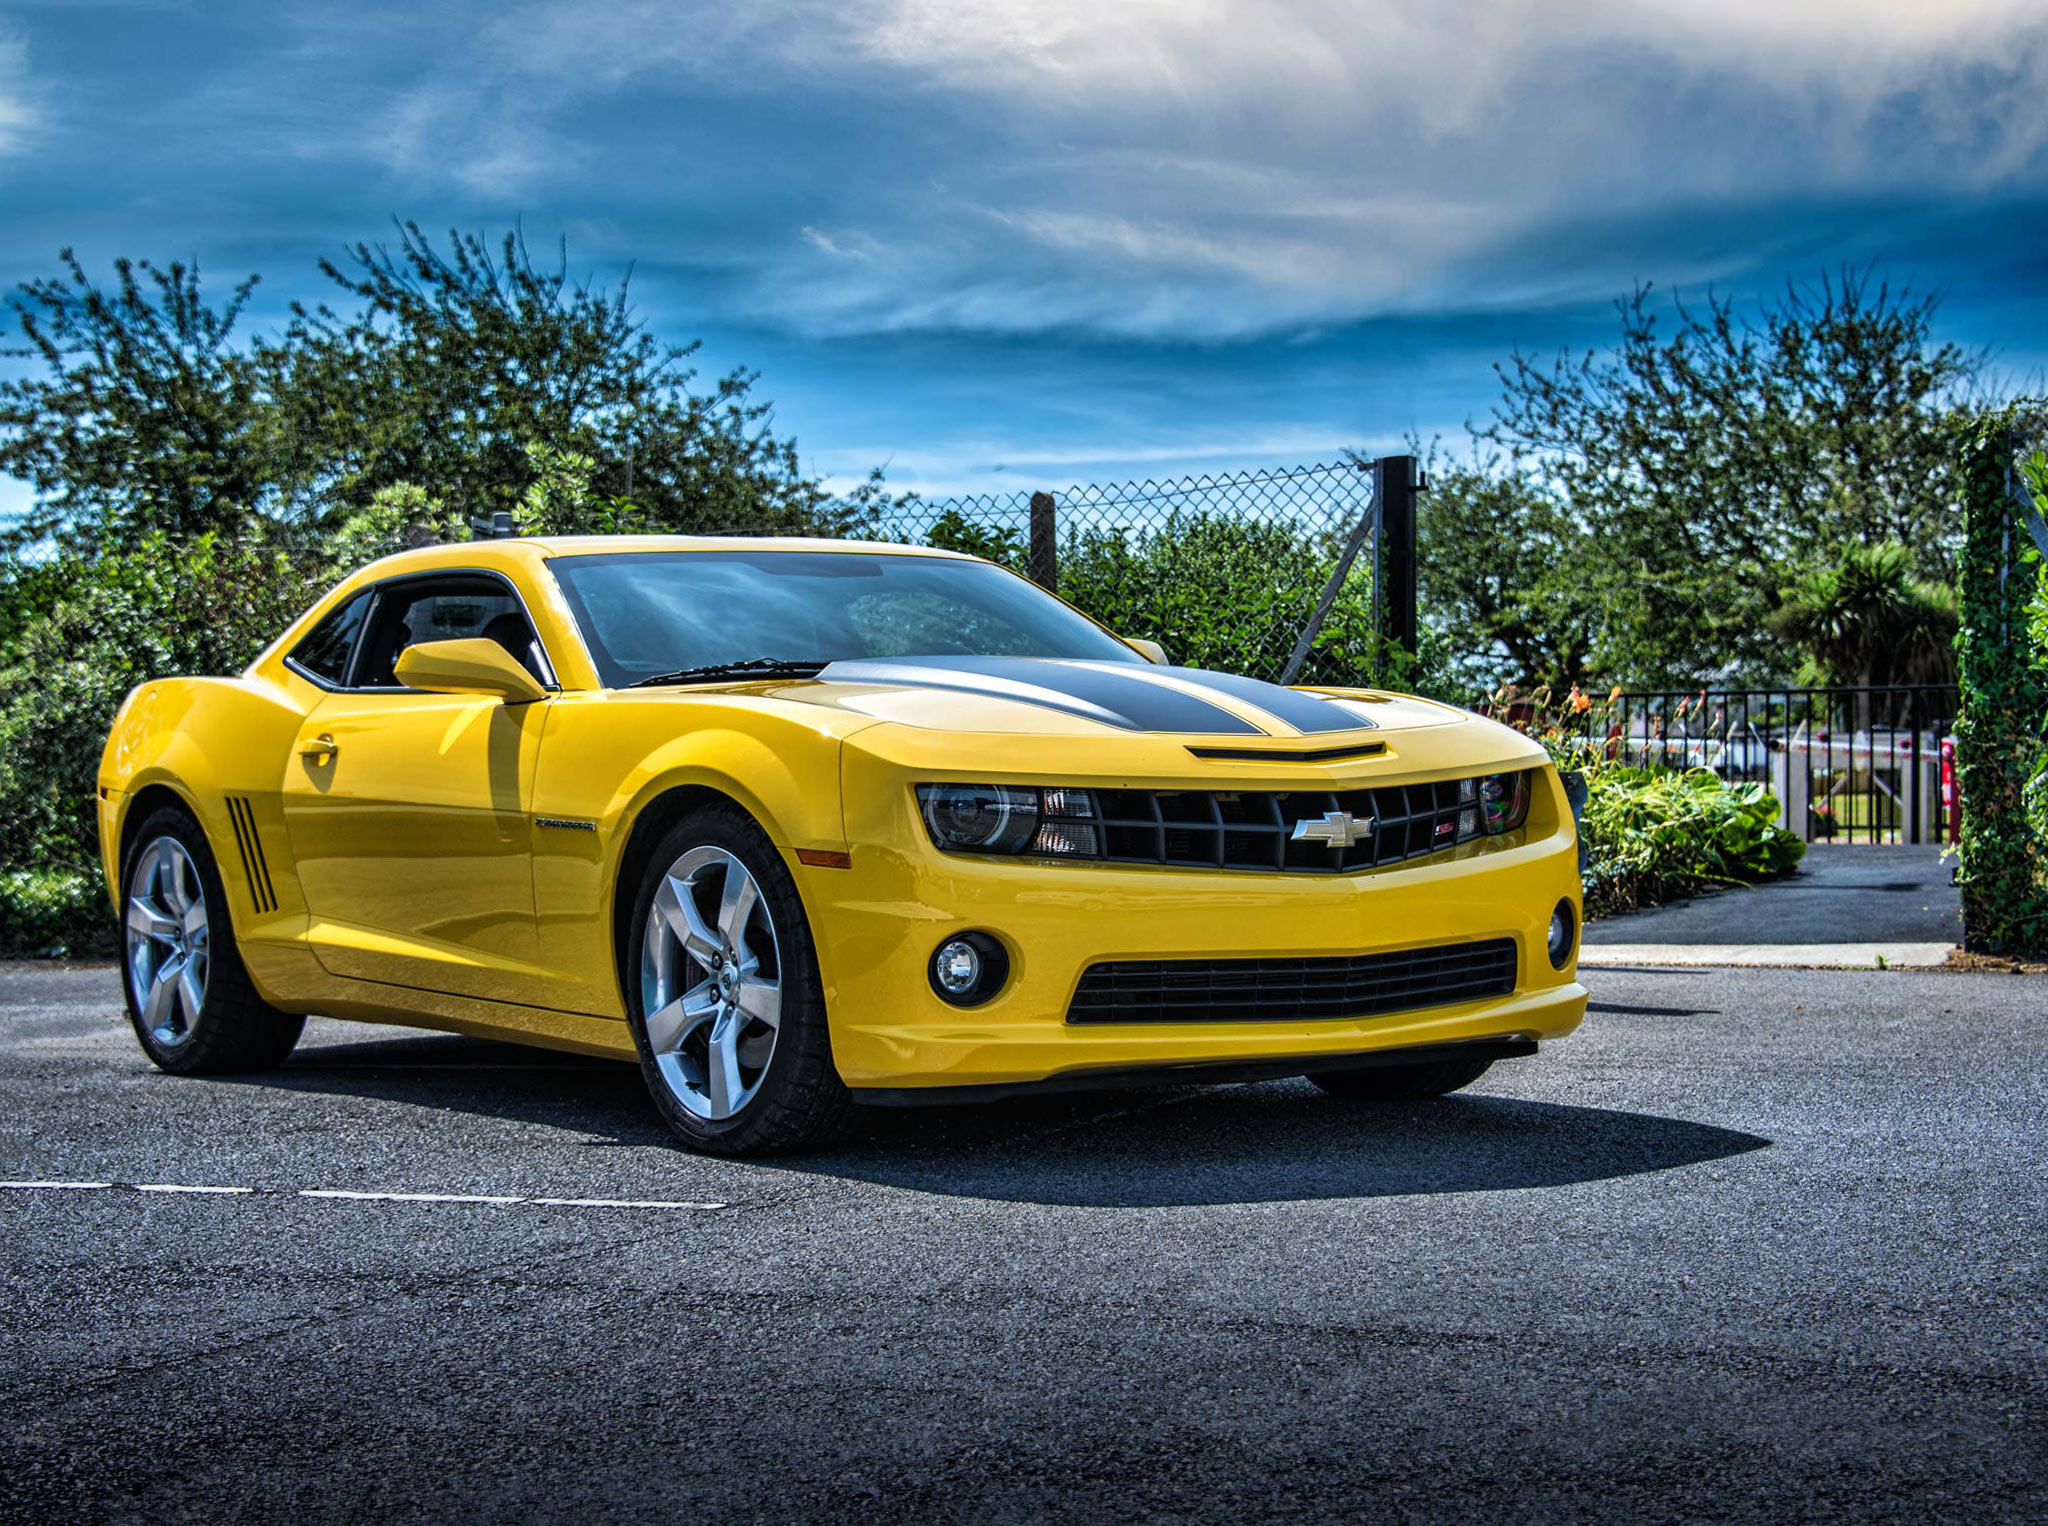 Chevrolet Muscle car photography Dean Wright Automotive Sports & Luxury Vehicle Photography